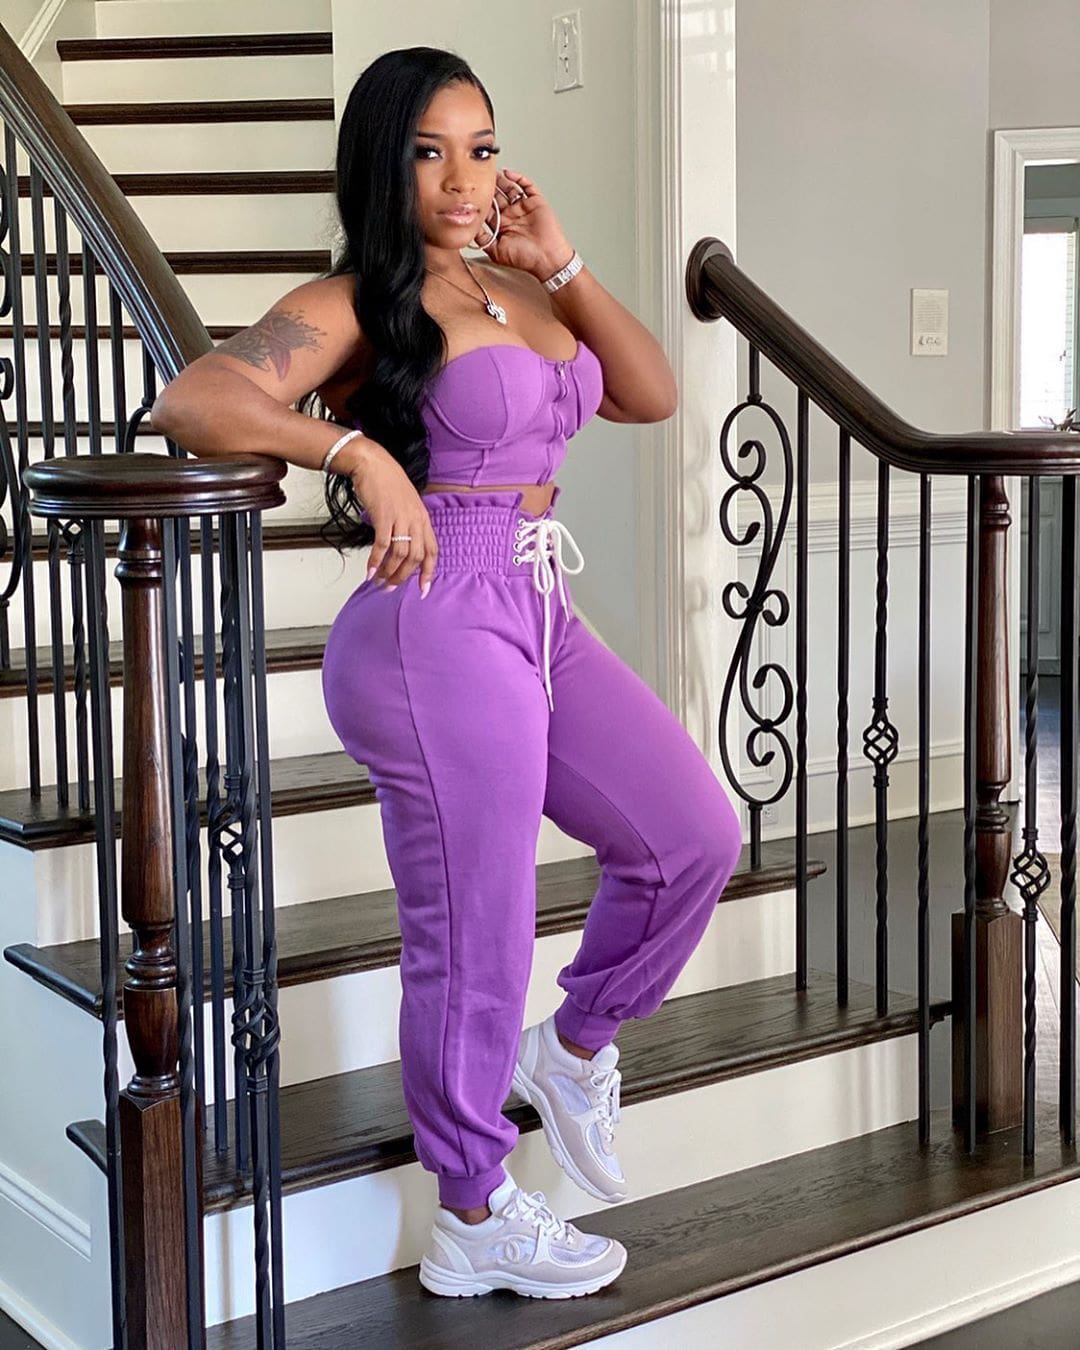 Toya Johnson Reveals The Amazing Gift She Gave Reign Rushing - See The Clips Of This Great Surprise